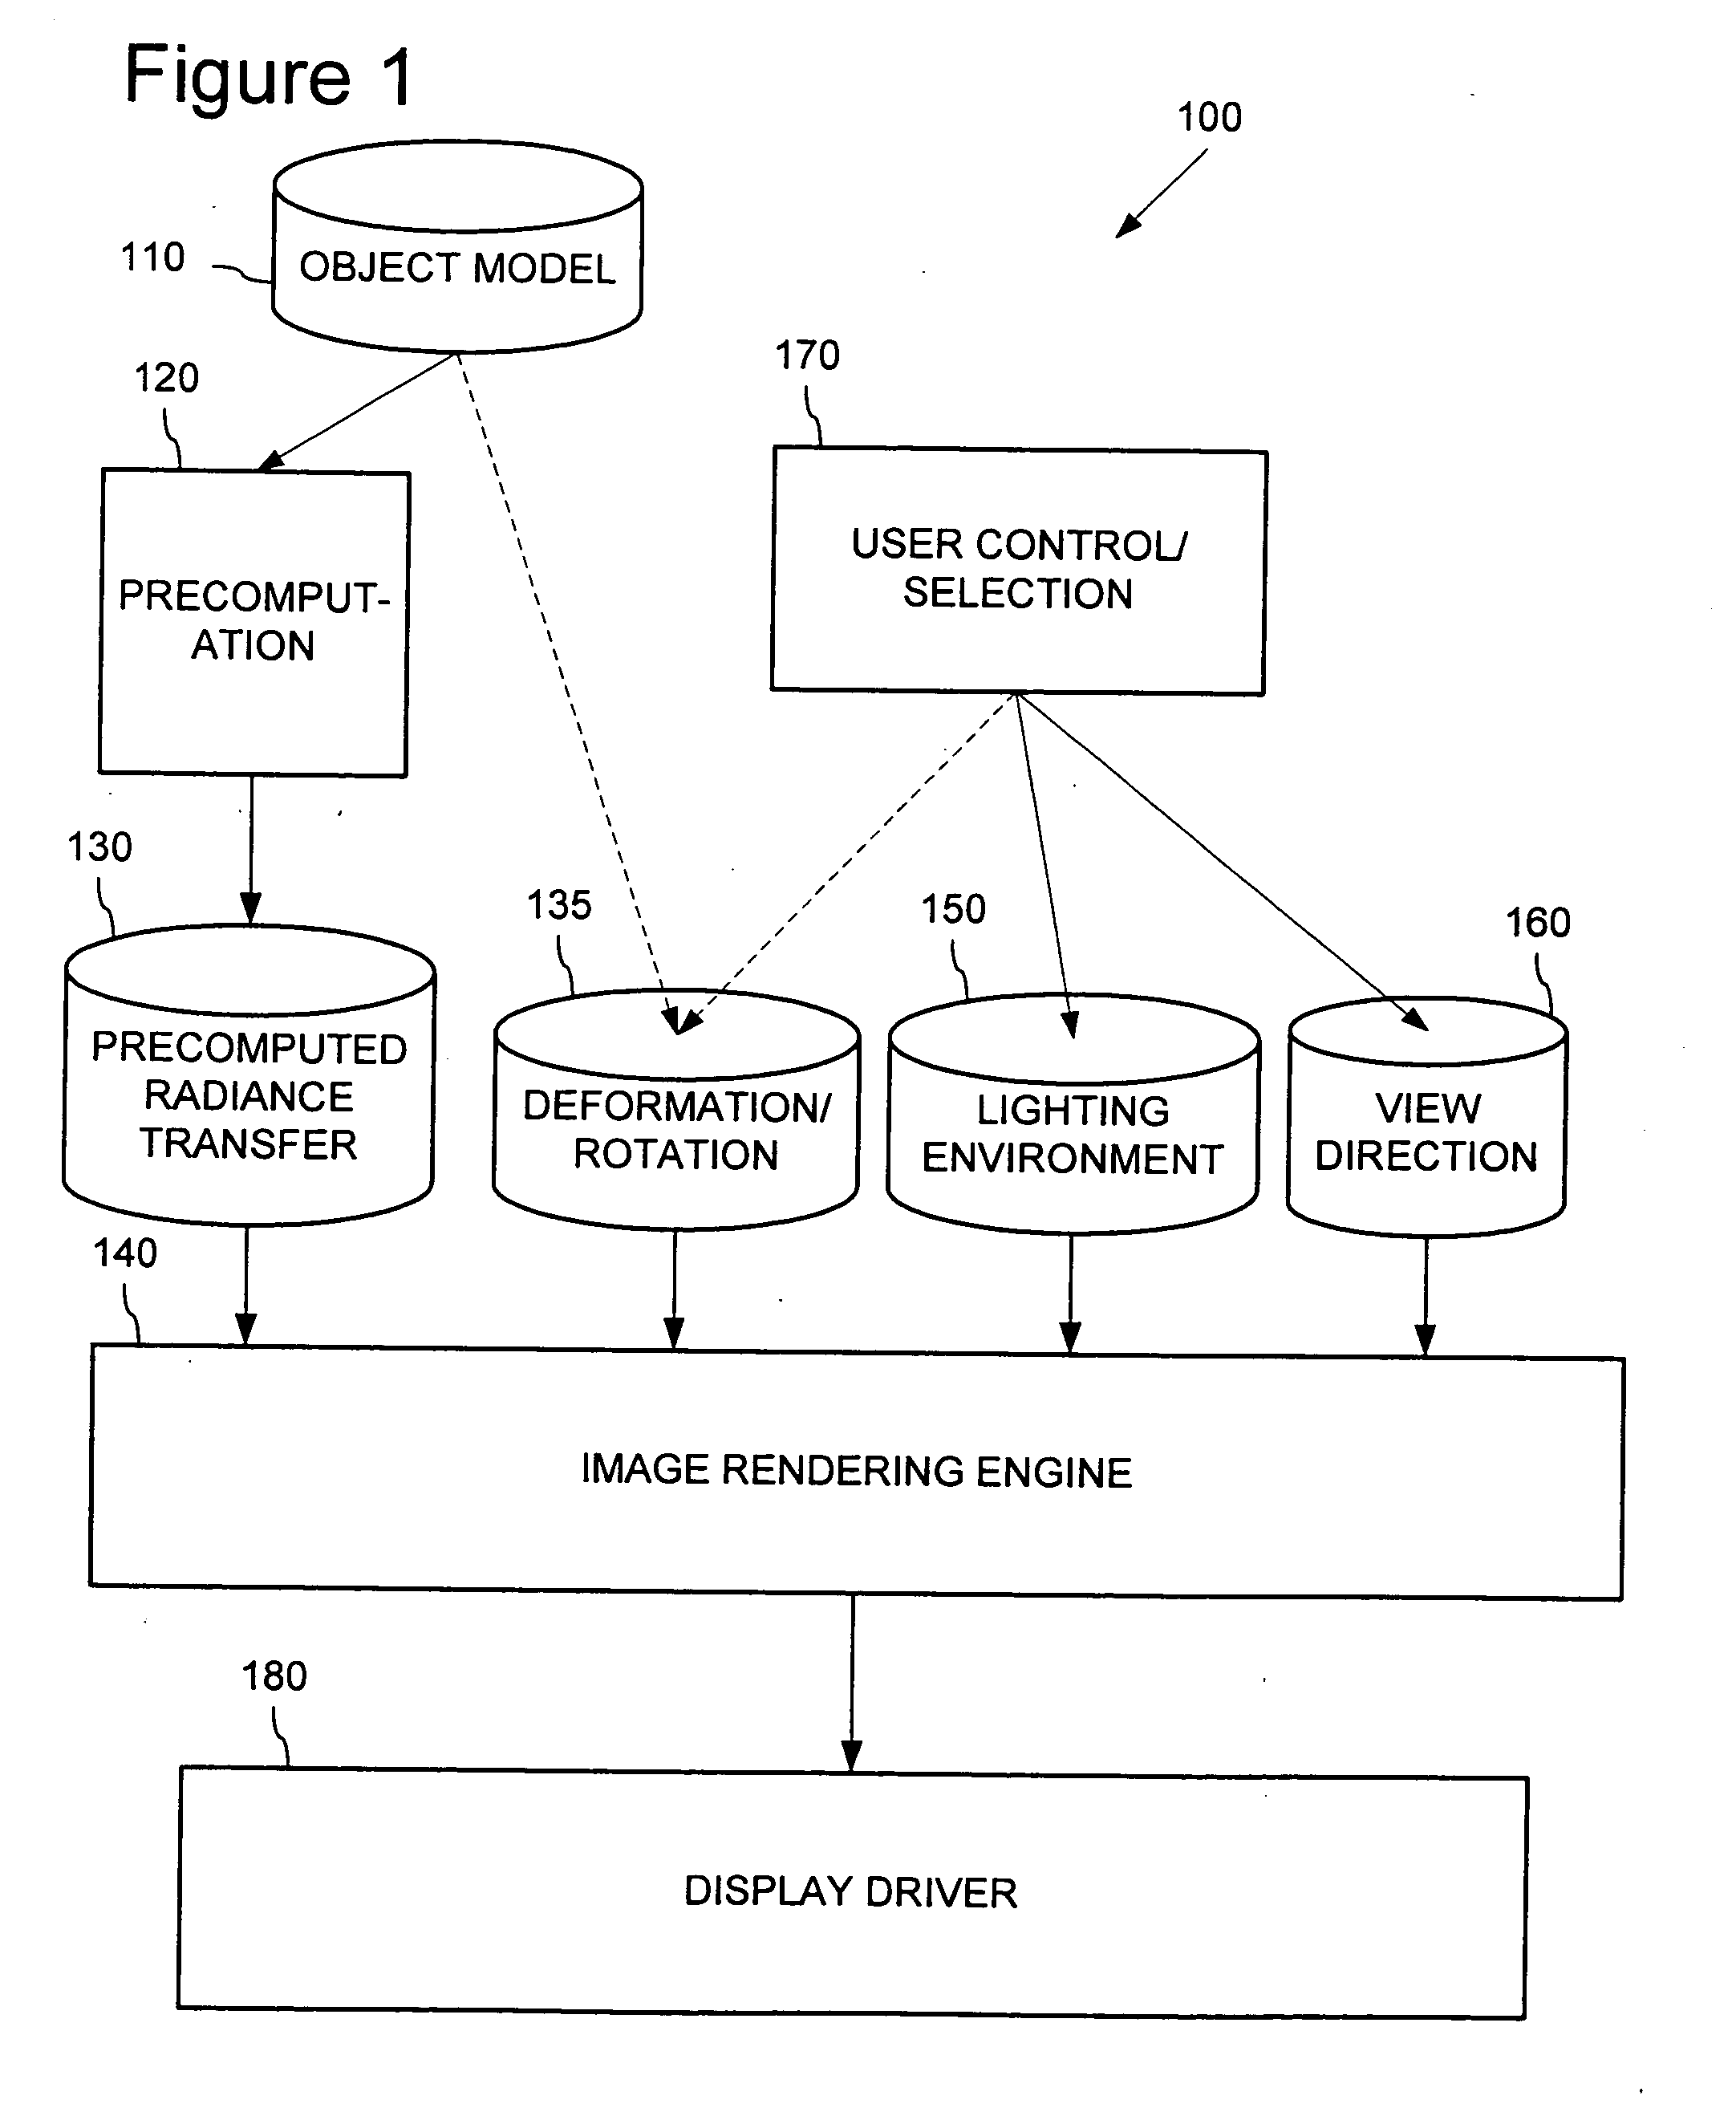 Local, deformable precomputed radiance transfer